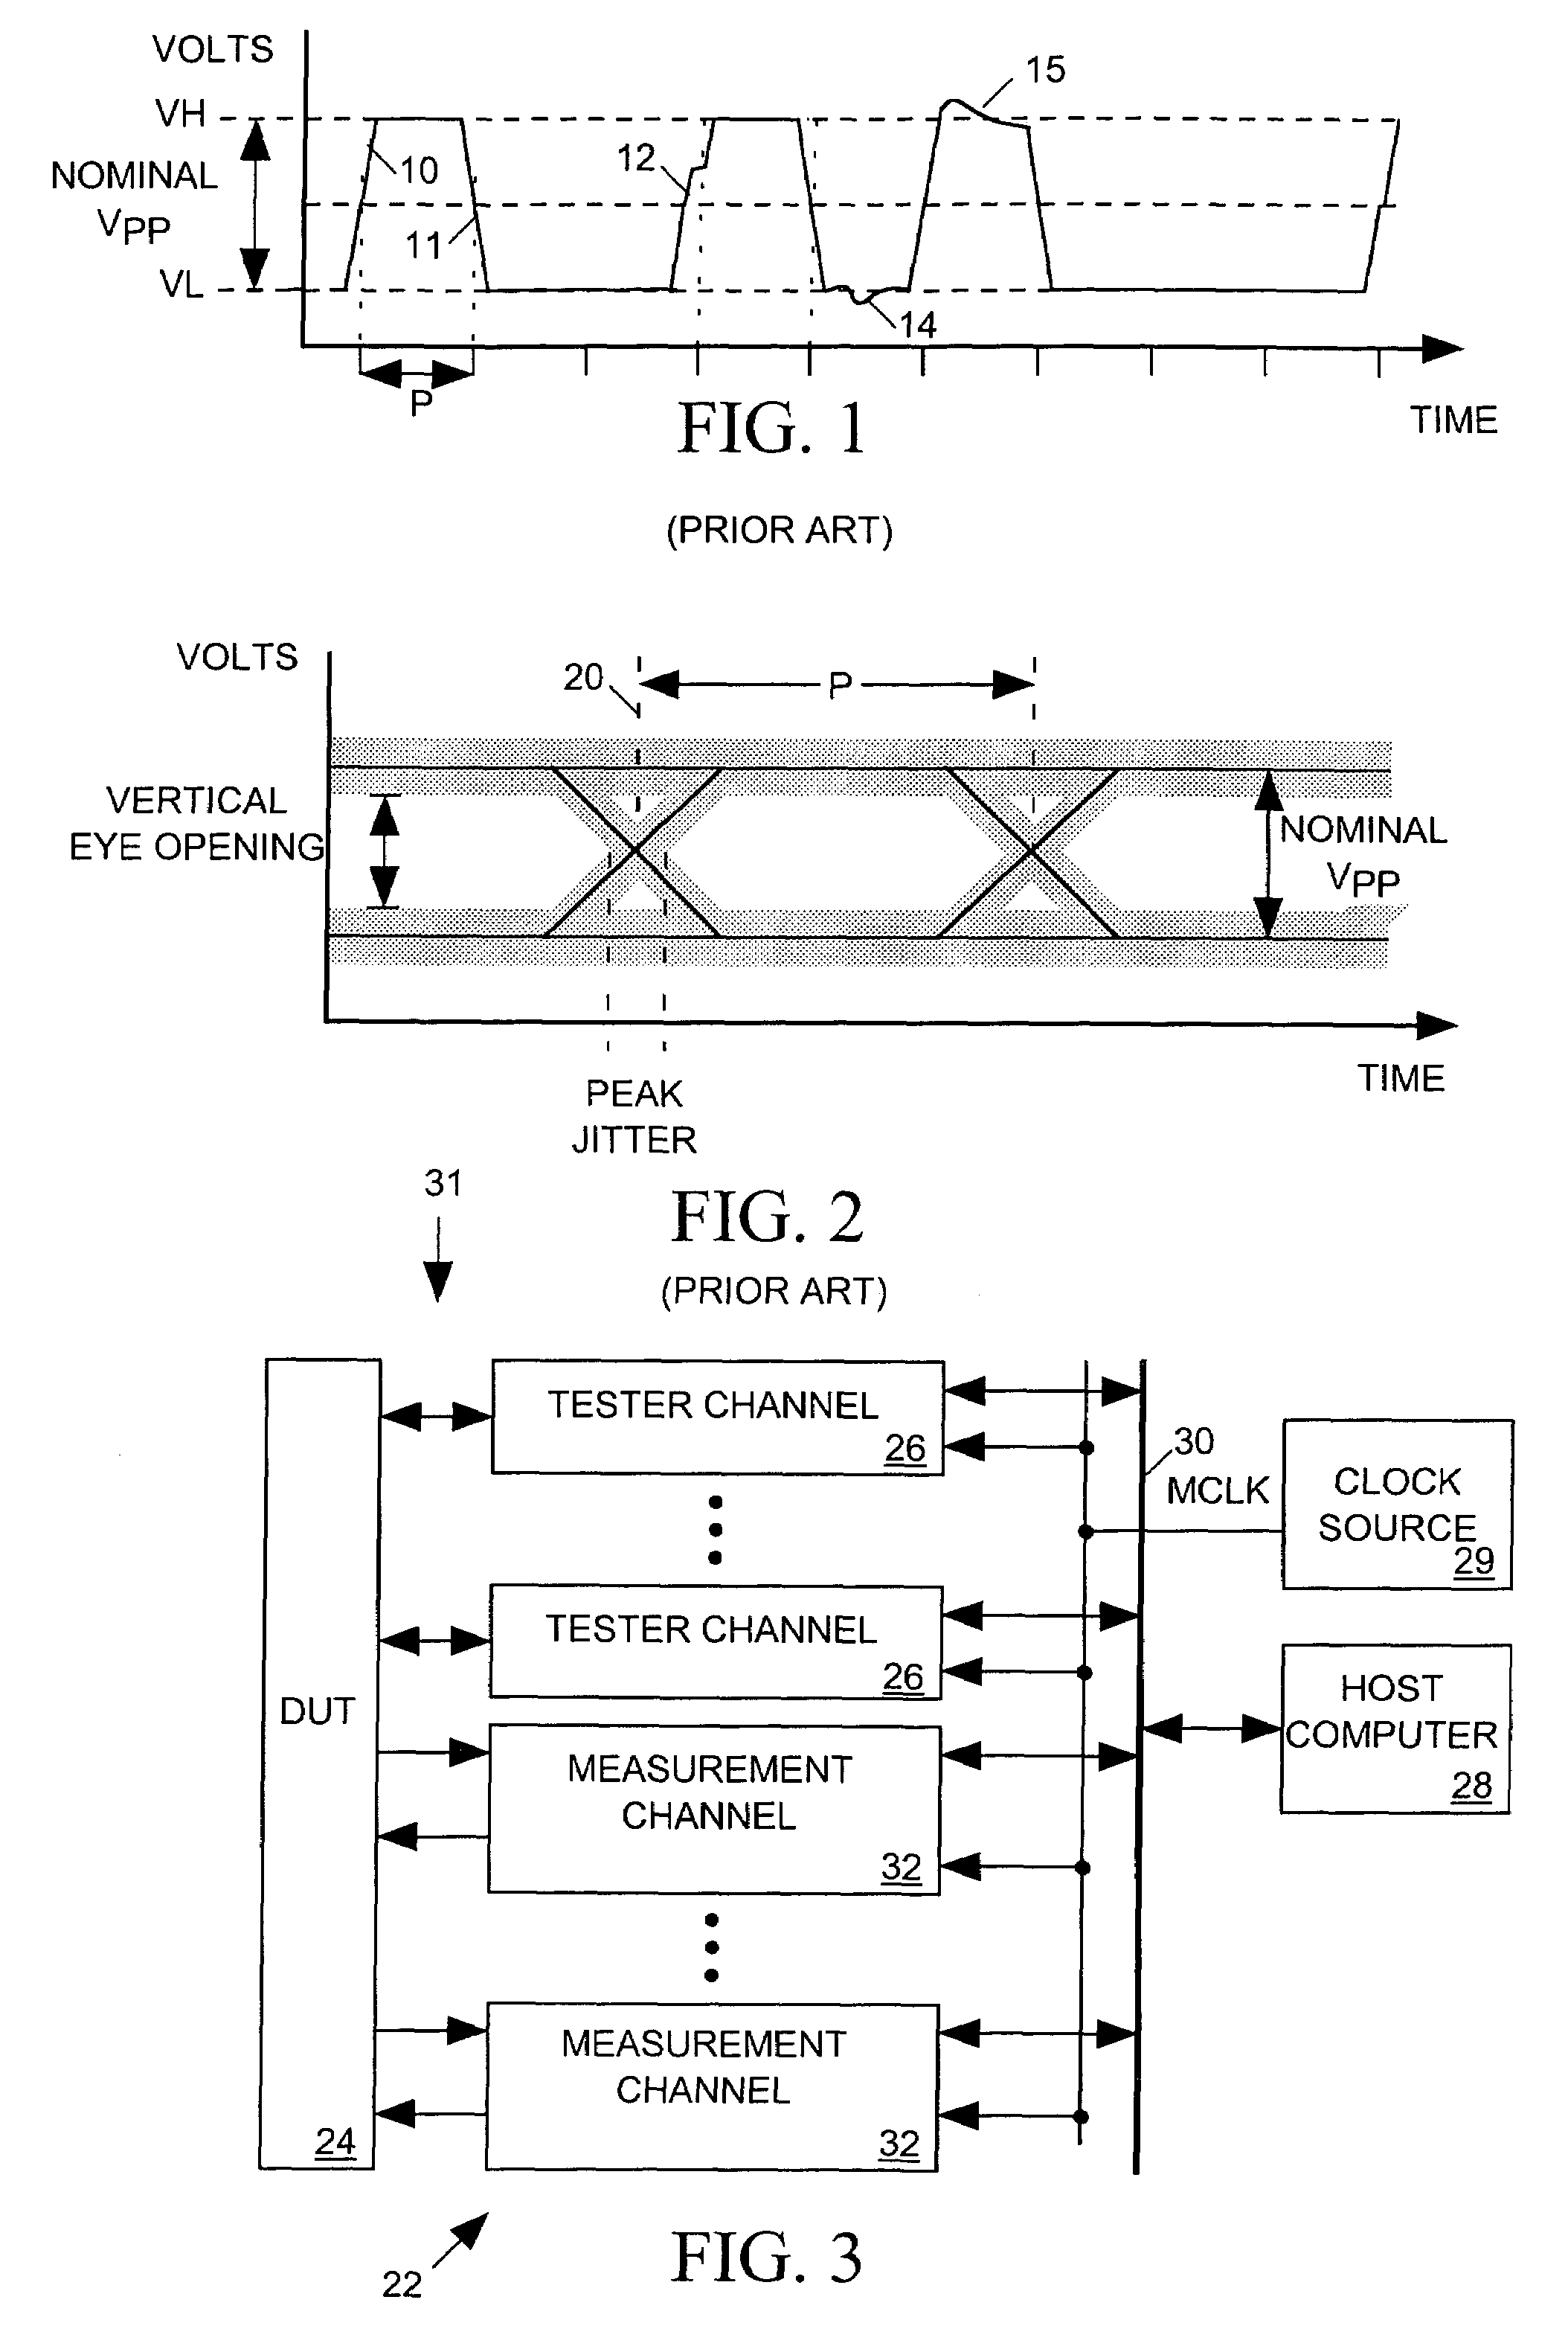 Apparatus for jitter testing an IC